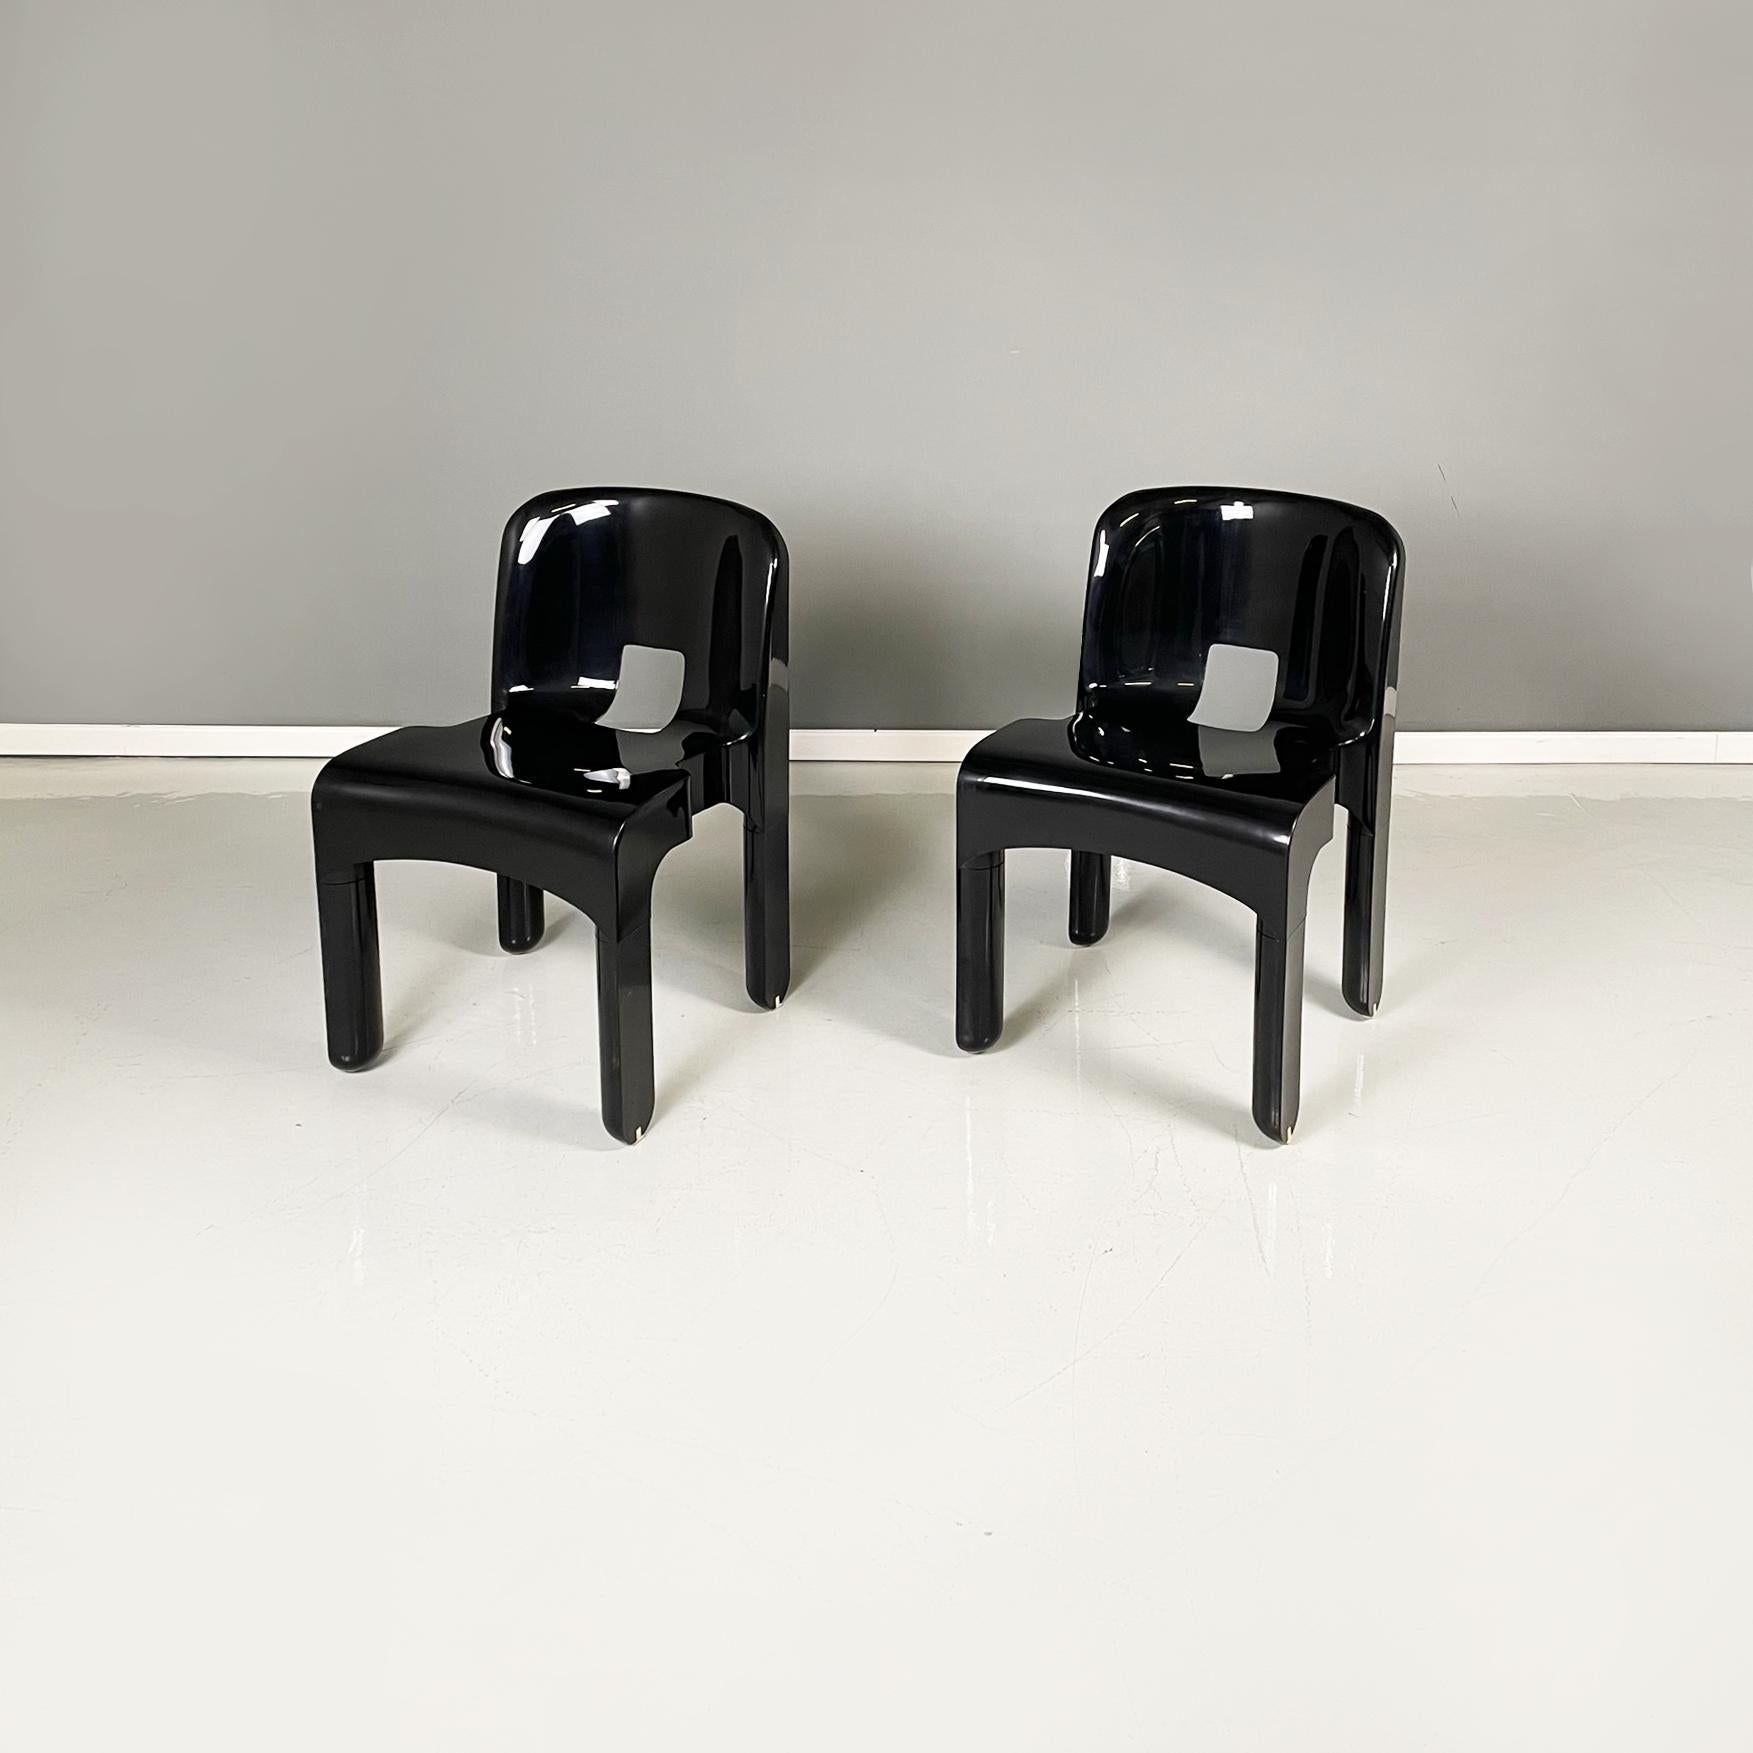 Italian modern black plastic ABS chairs mod. 4868 by Joe Colombo for Kartell, 1970s
Pair of fantastic chairs mod. 4868, also known as the Universal Chair, in glossy black ABS plastic. The slightly curved backrest is rectangular with rounded upper